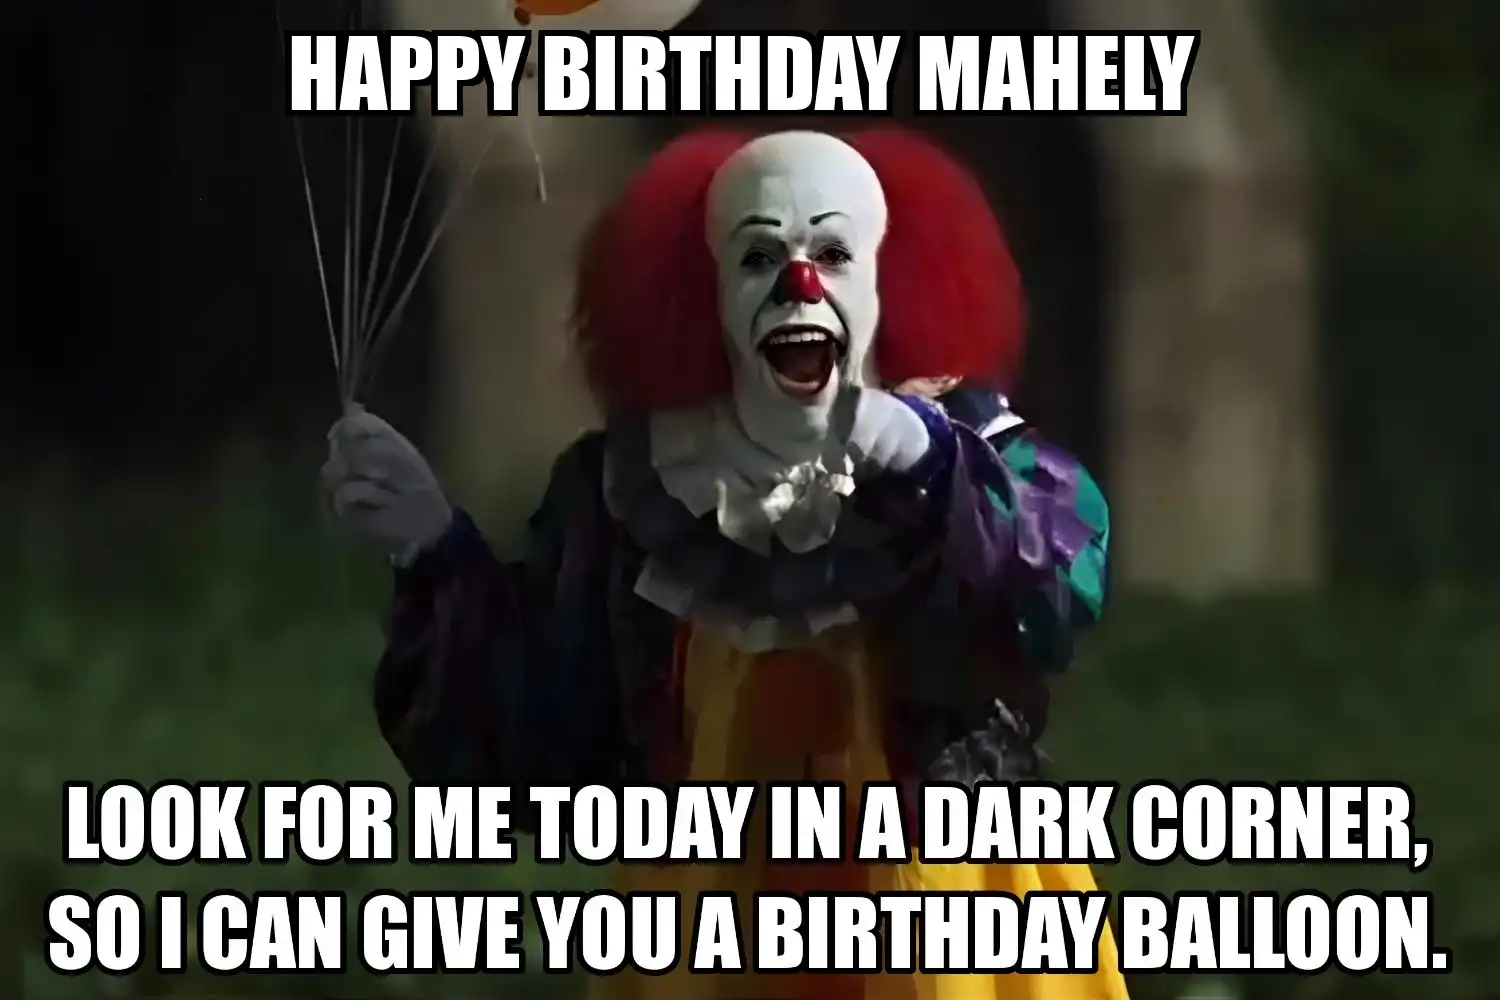 Happy Birthday Mahely I Can Give You A Balloon Meme